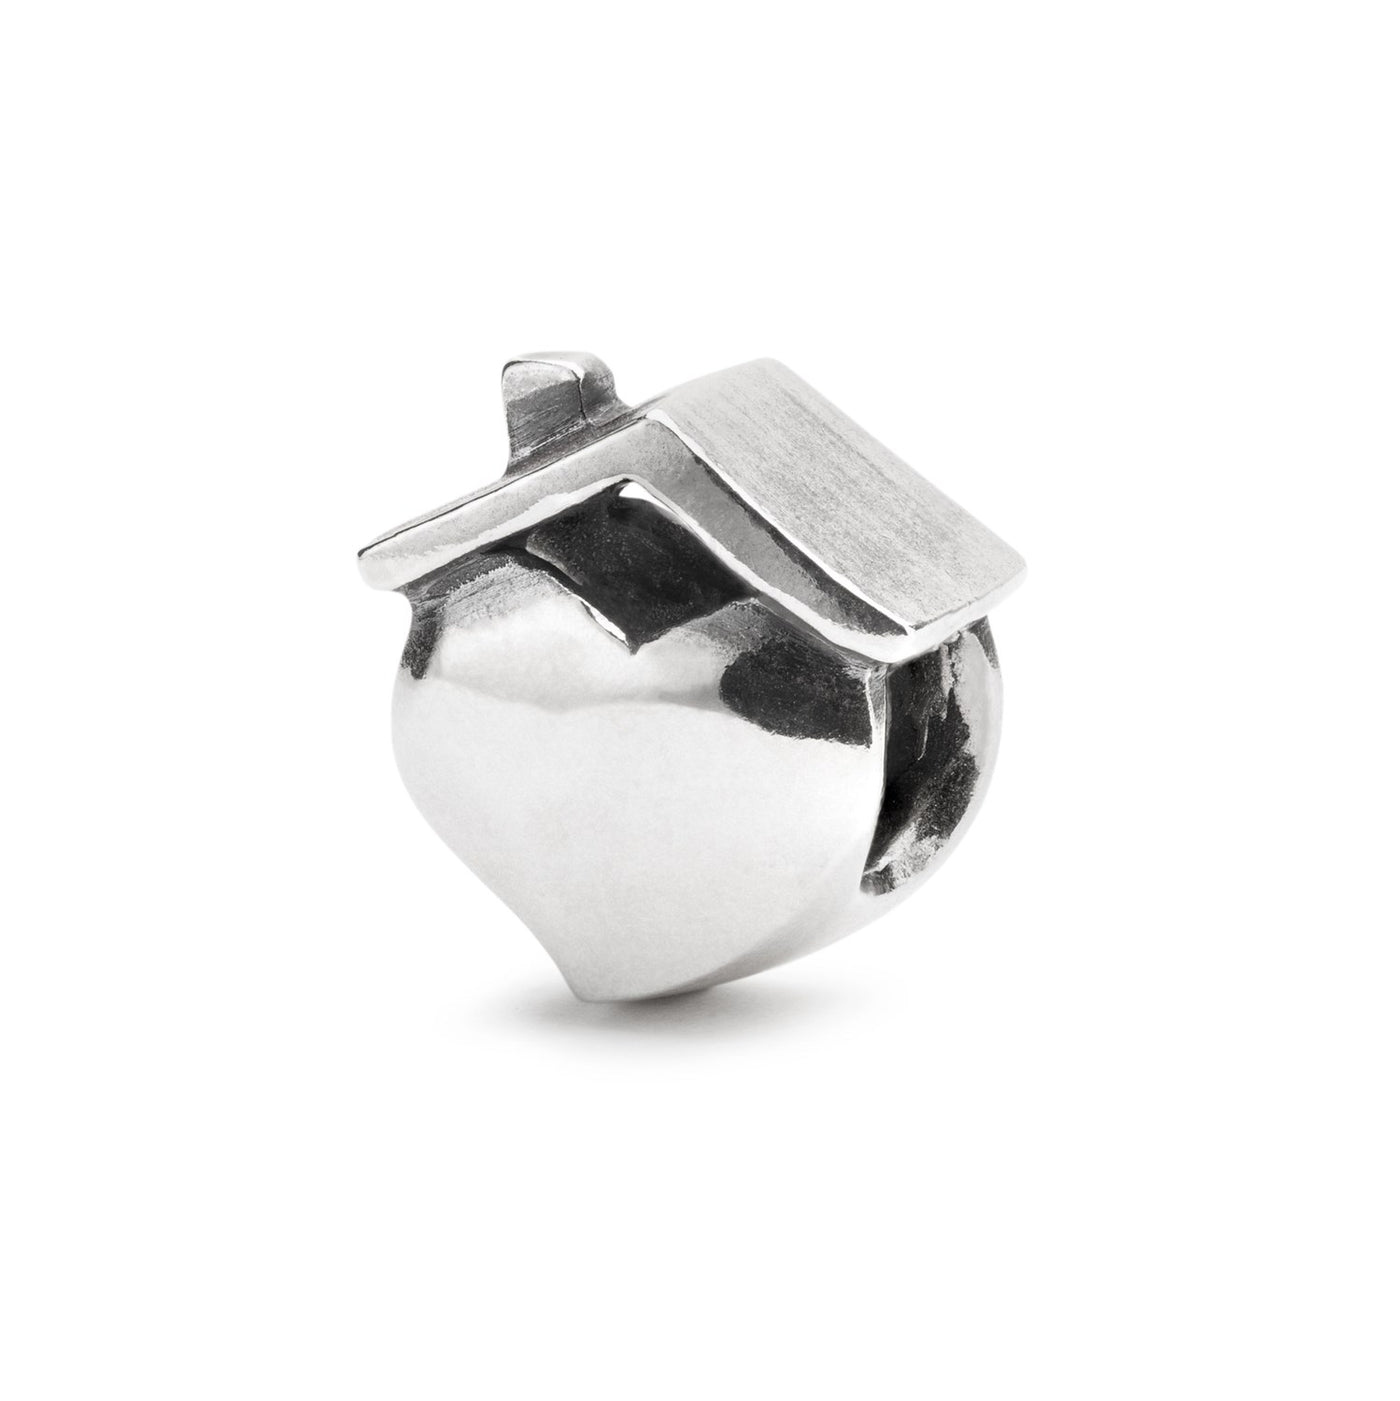 The Home Bead features a cute little heart with a roof on top, resembling a home. Entirely made of silver, the perfect addition to take home with you, wherever you are.